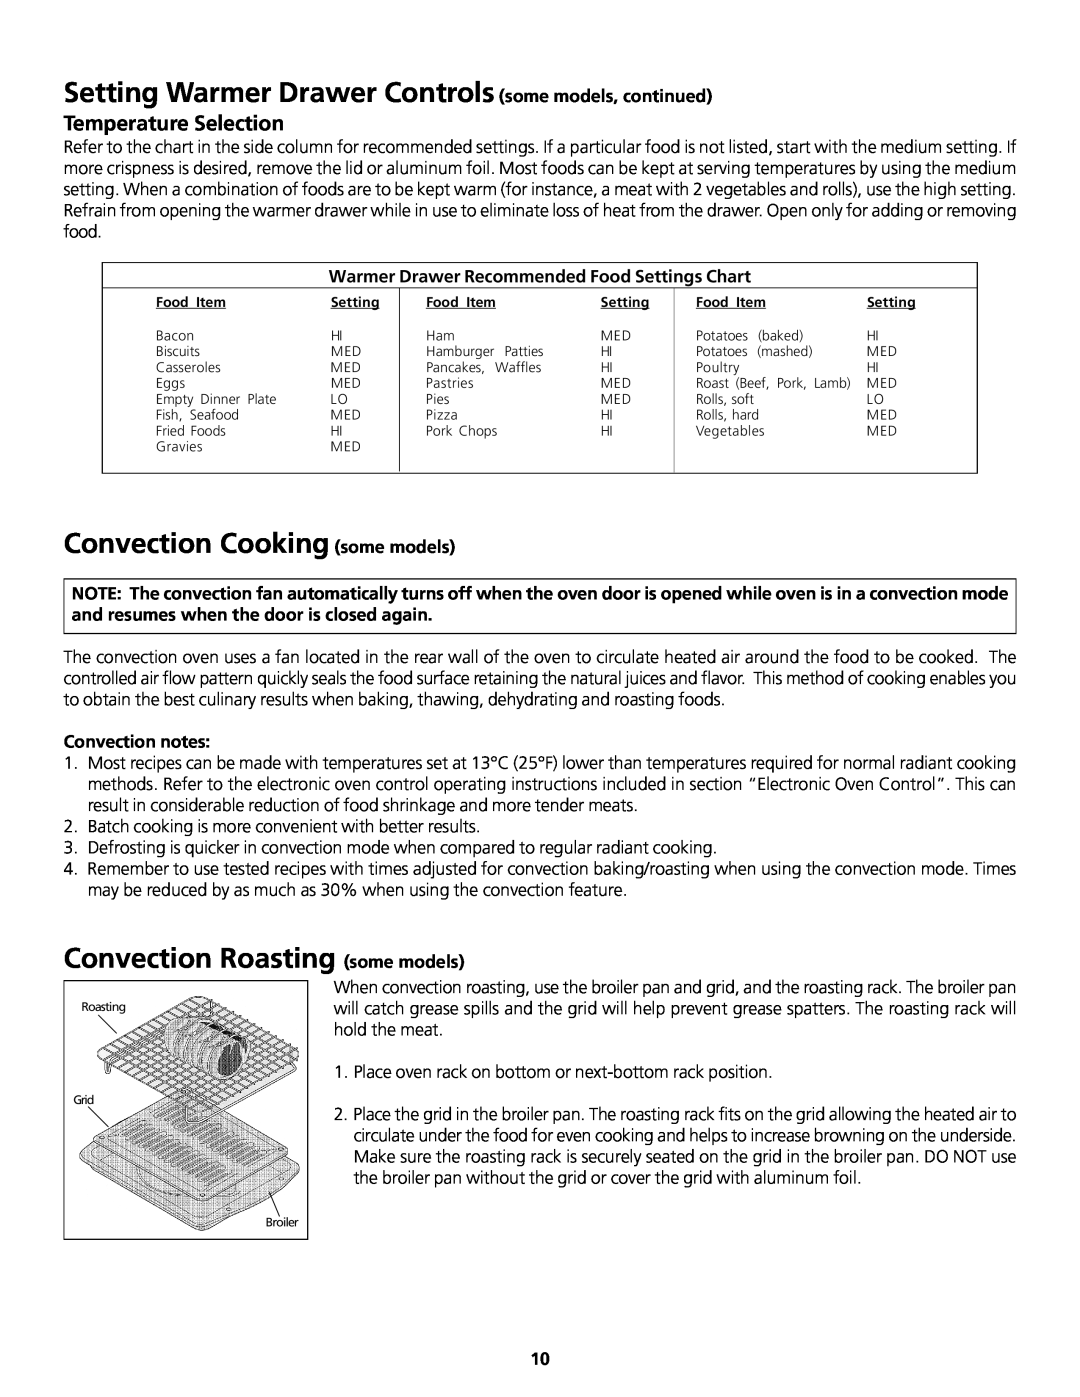 Frigidaire 318200858 Setting Warmer Drawer Controls some models, continued, Convection Cooking some models 